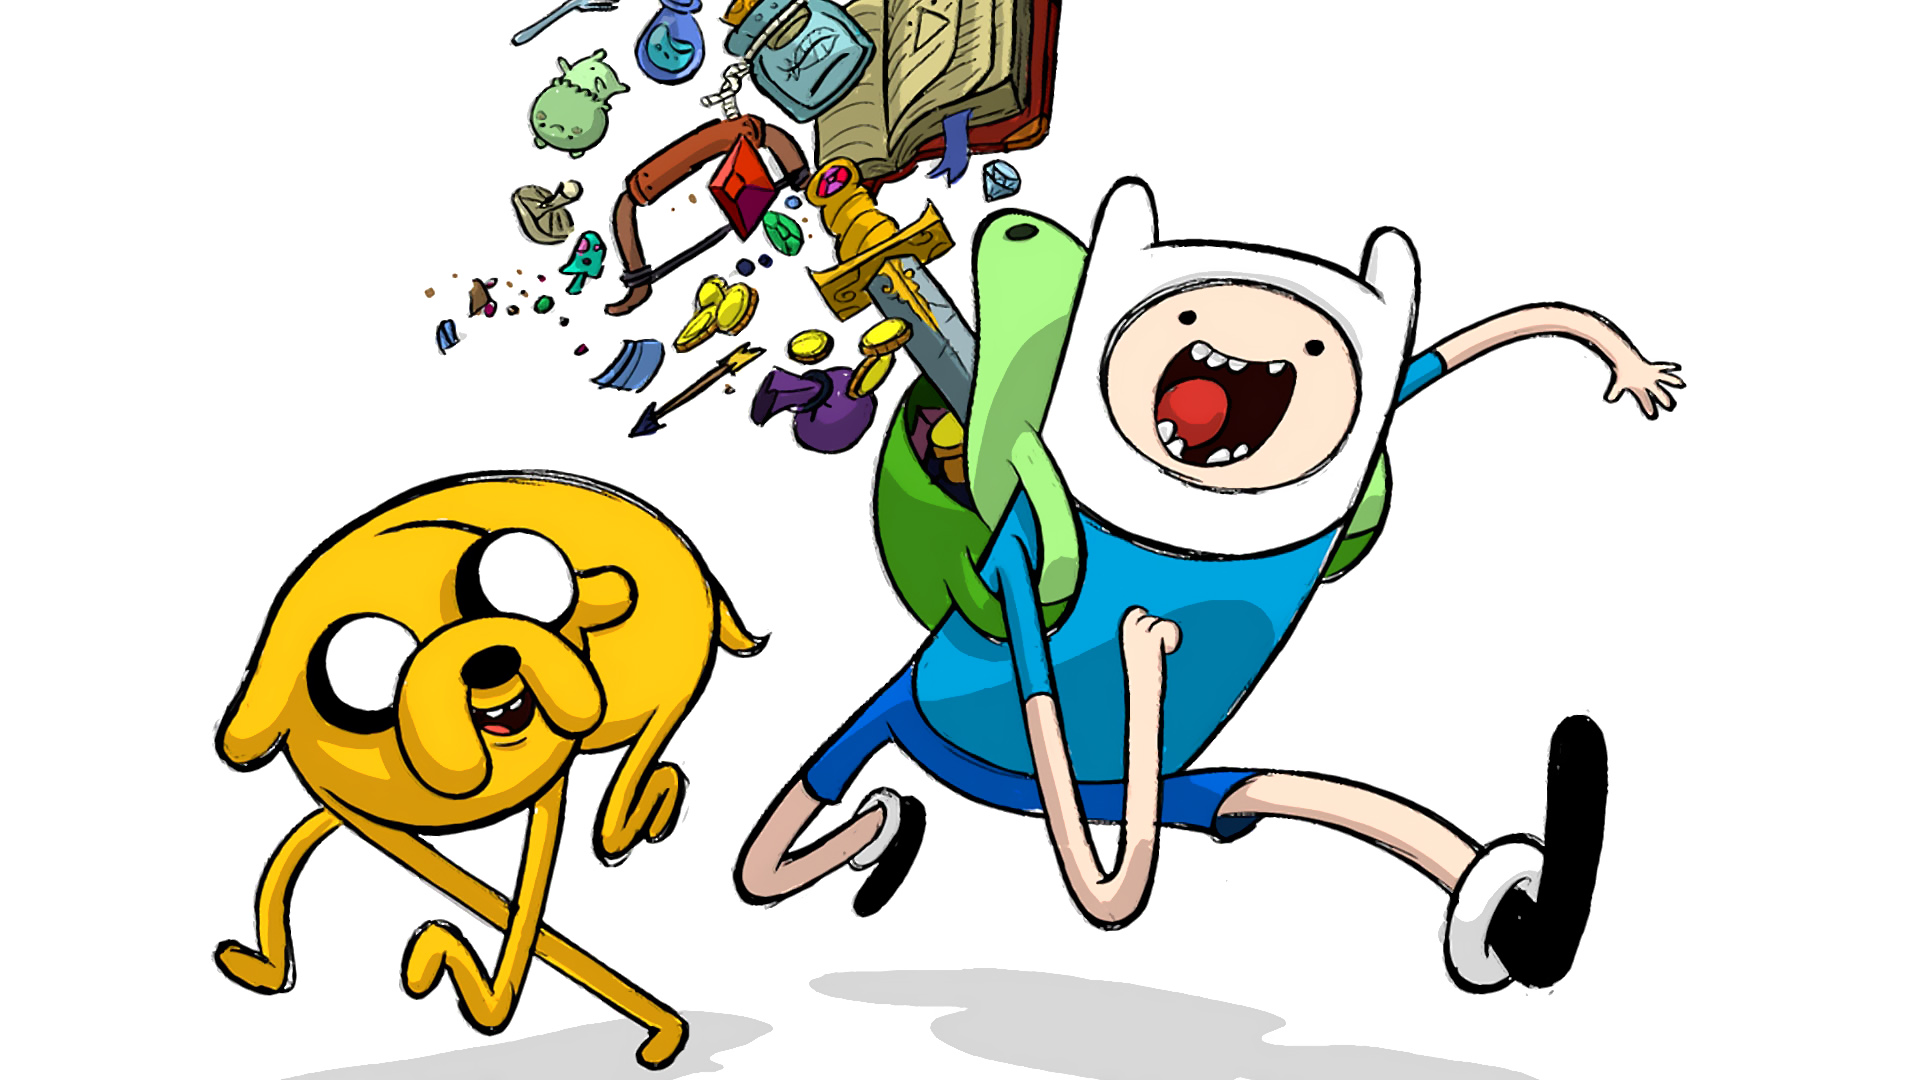 Adventure TimeHD Wallpapers